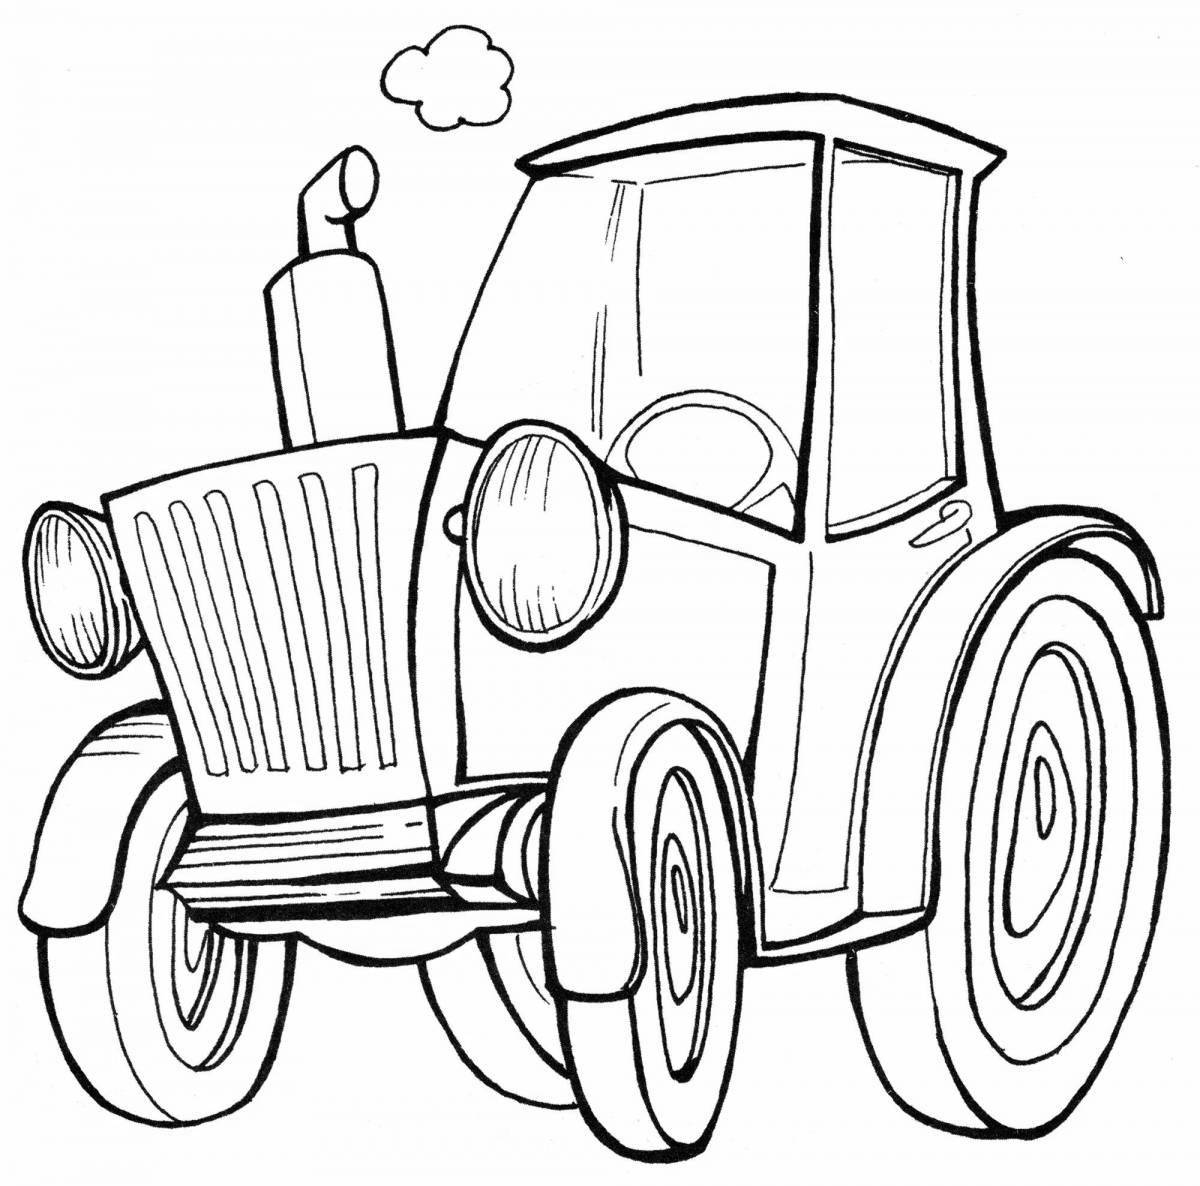 Adorable blue tractor coloring book for 4-5 year olds